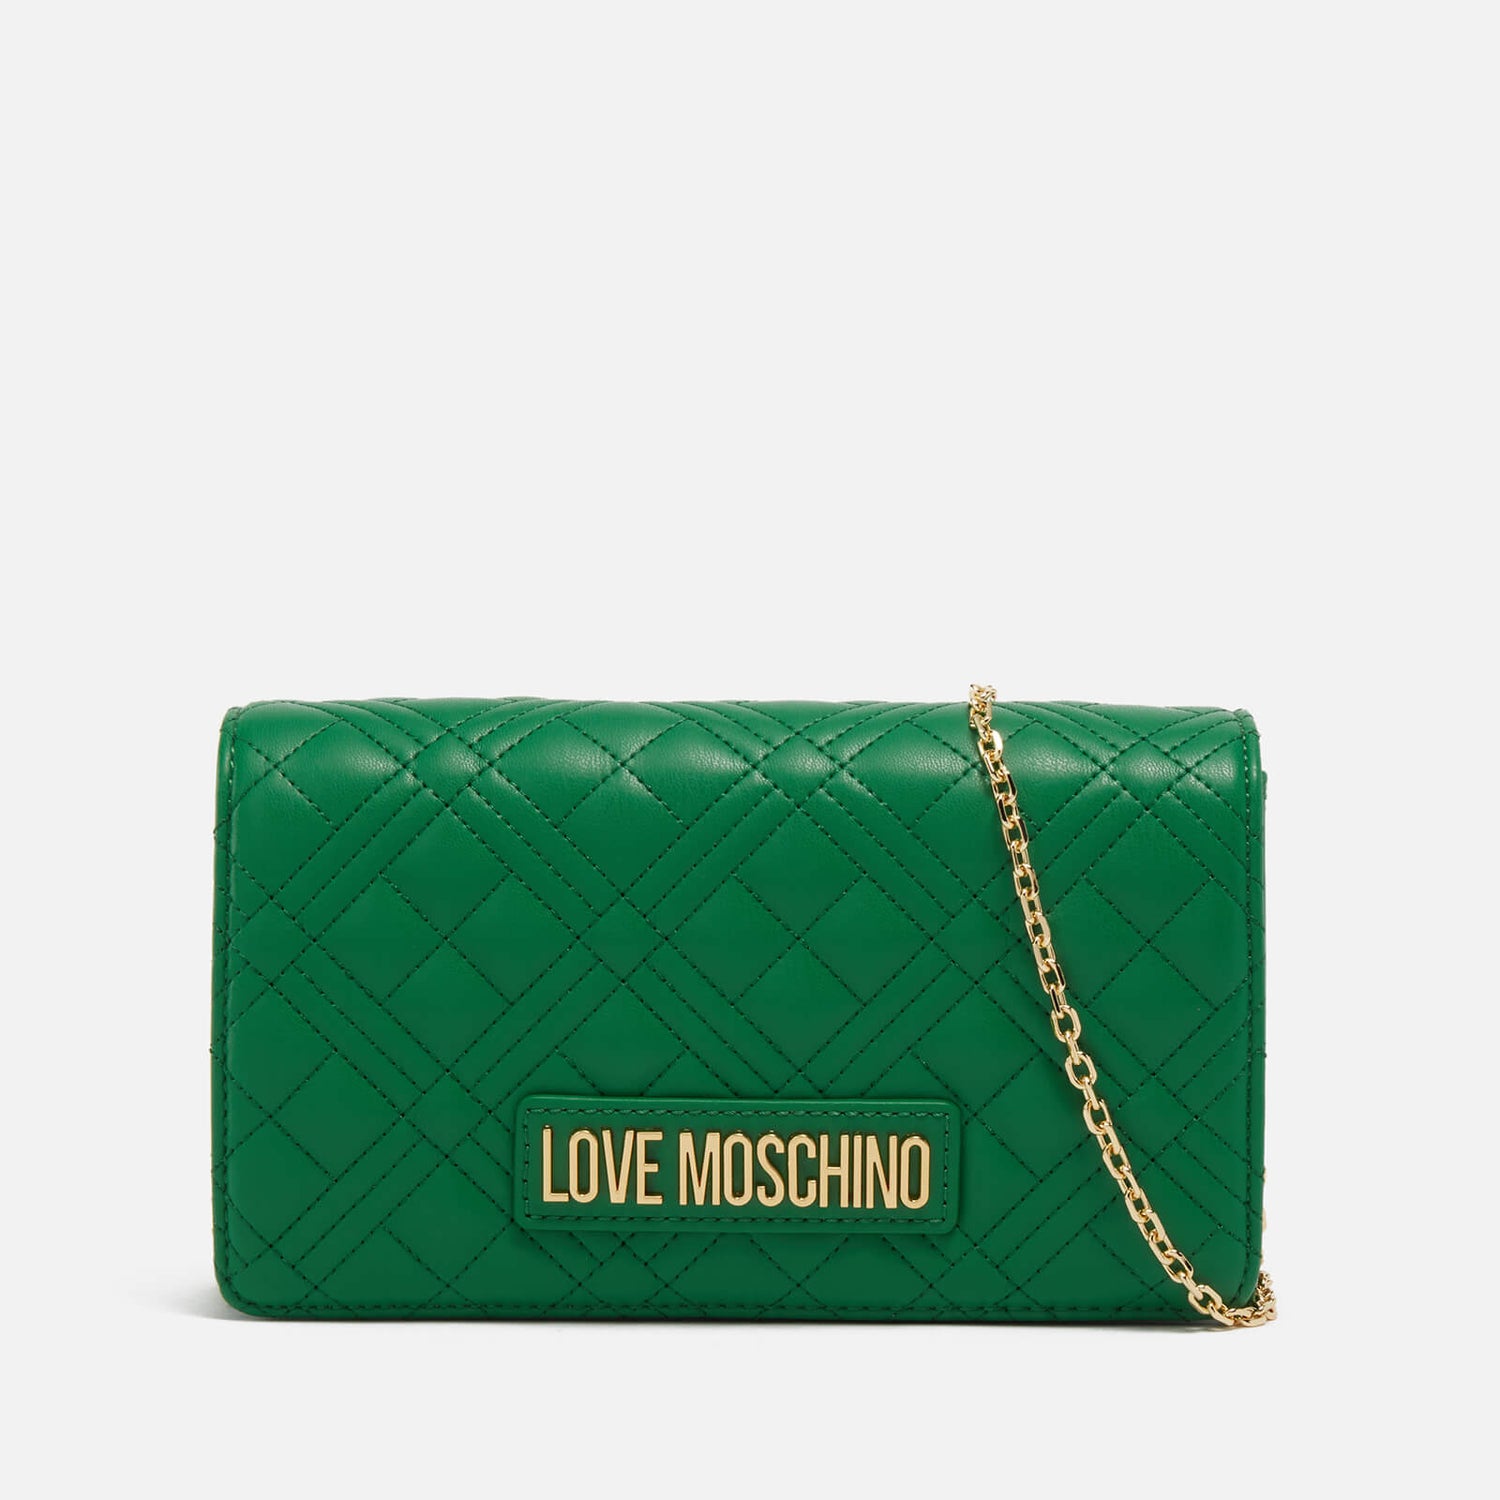 Love Moschino Borsa Faux Leather Shoulder Bag